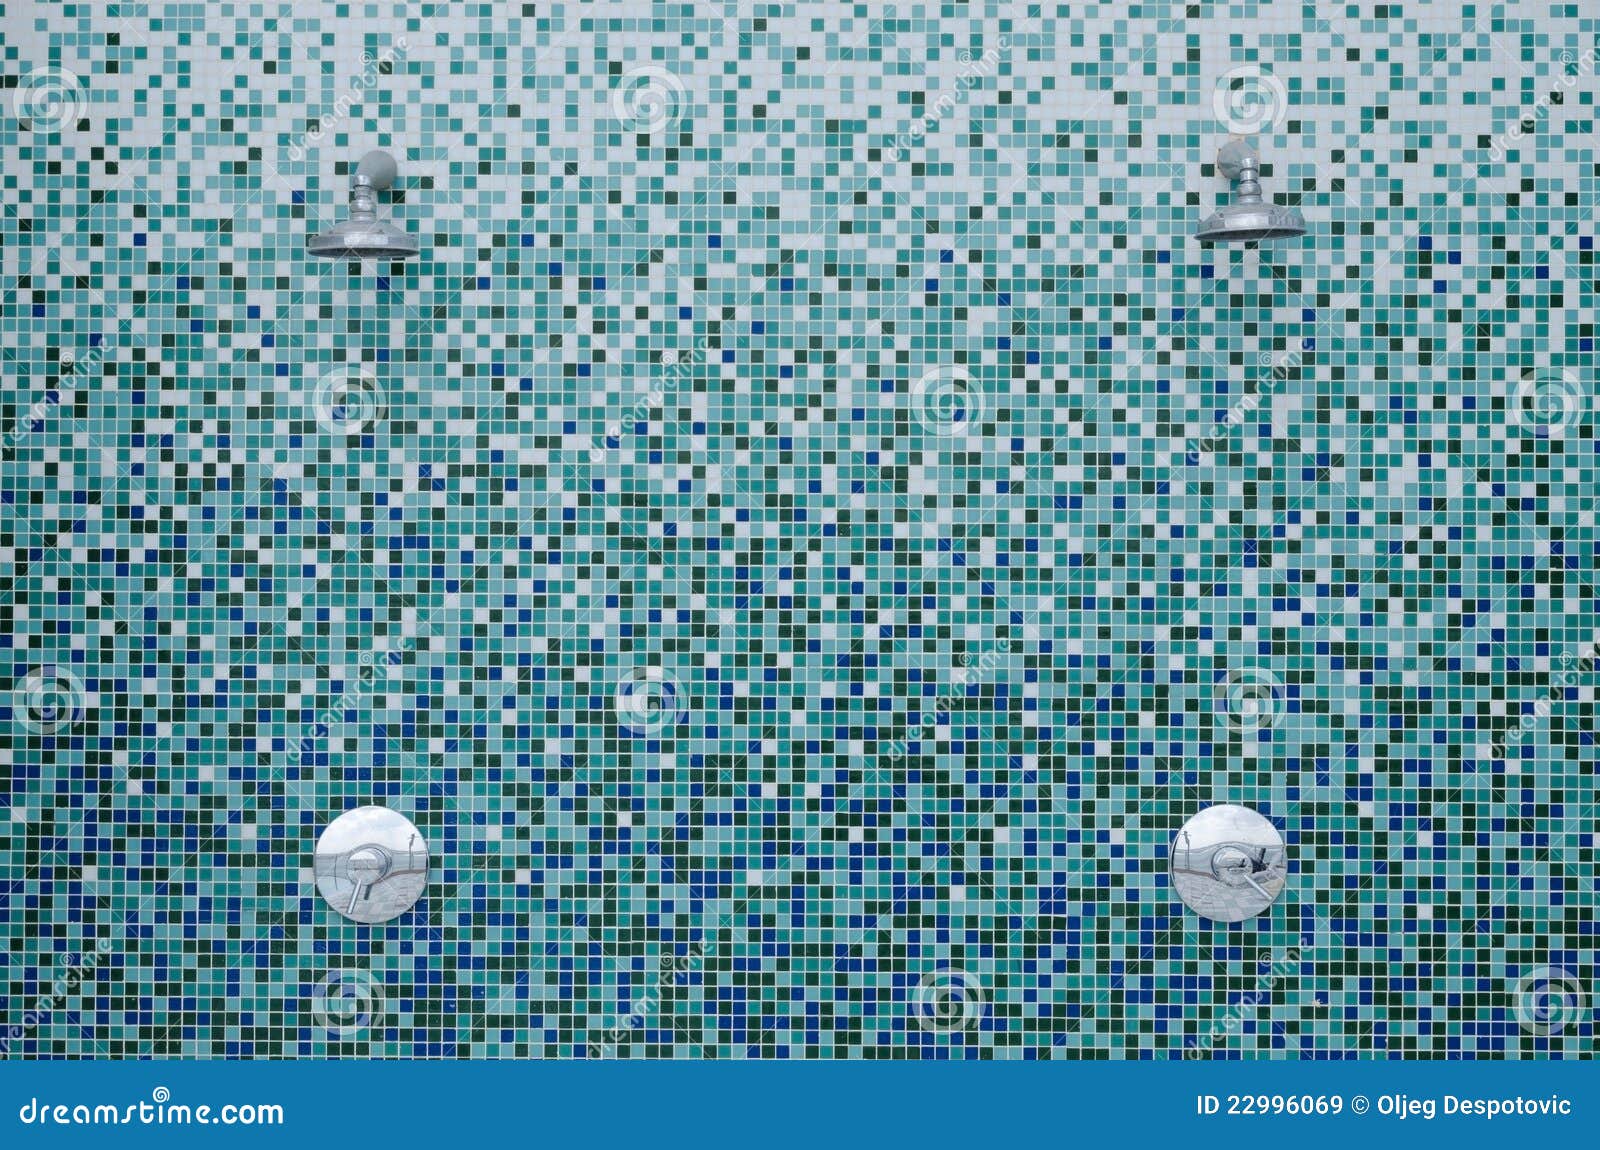 showers on mosaic tiles